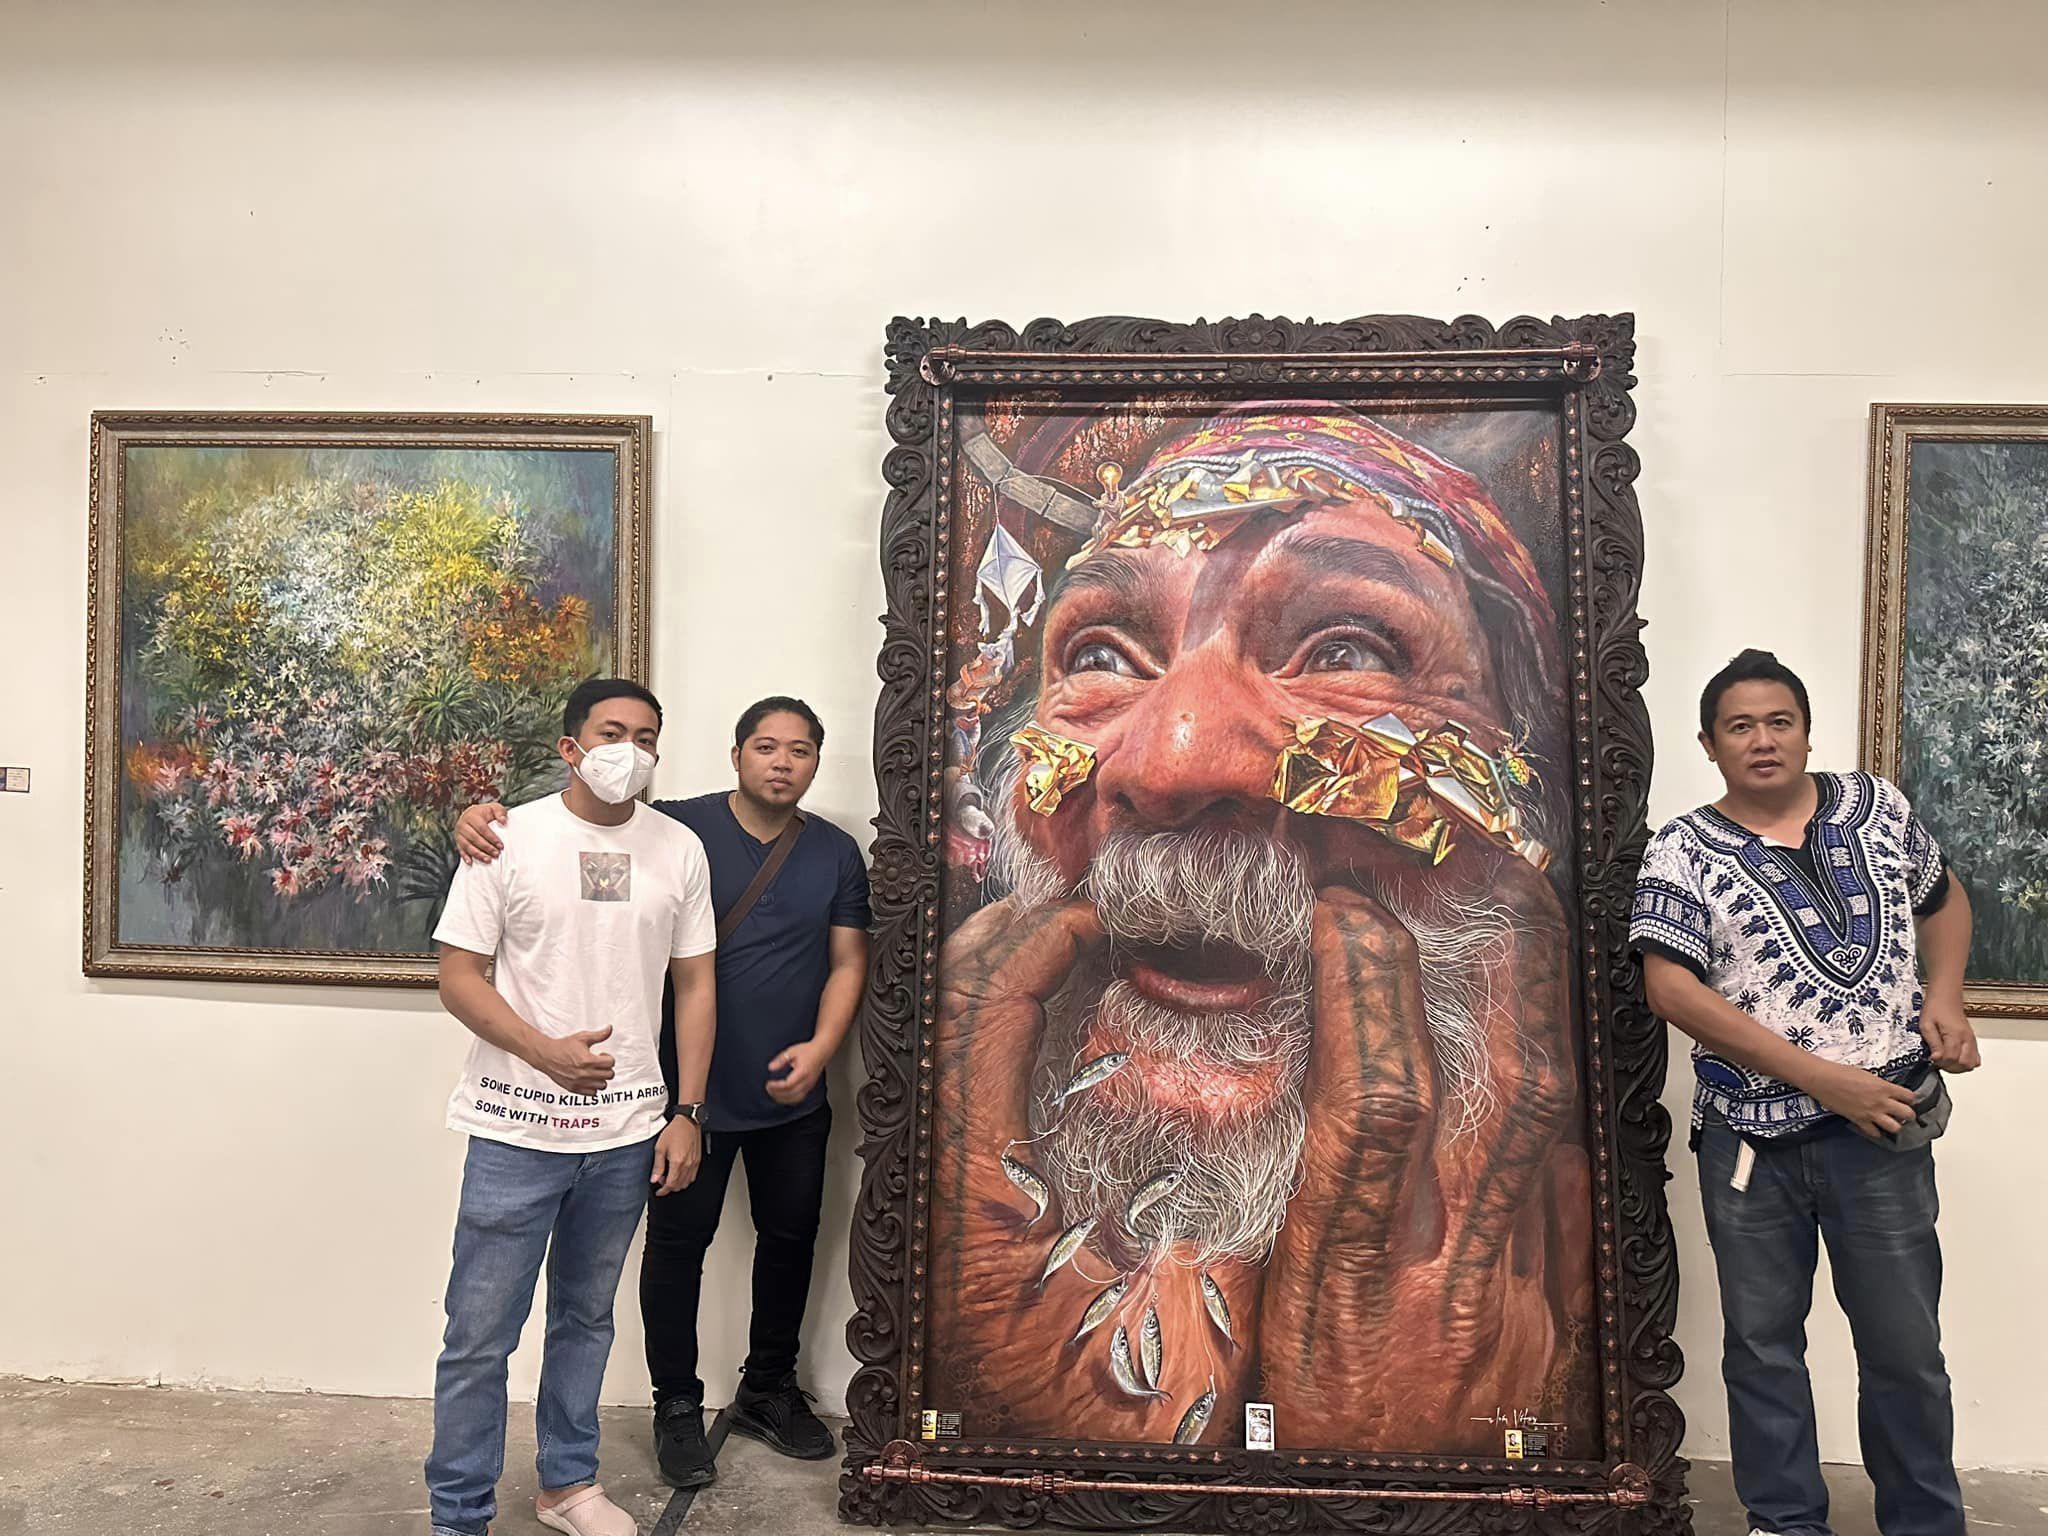 The artist (in the middle) posing with the artwork. Photo from Elvin Vitor.